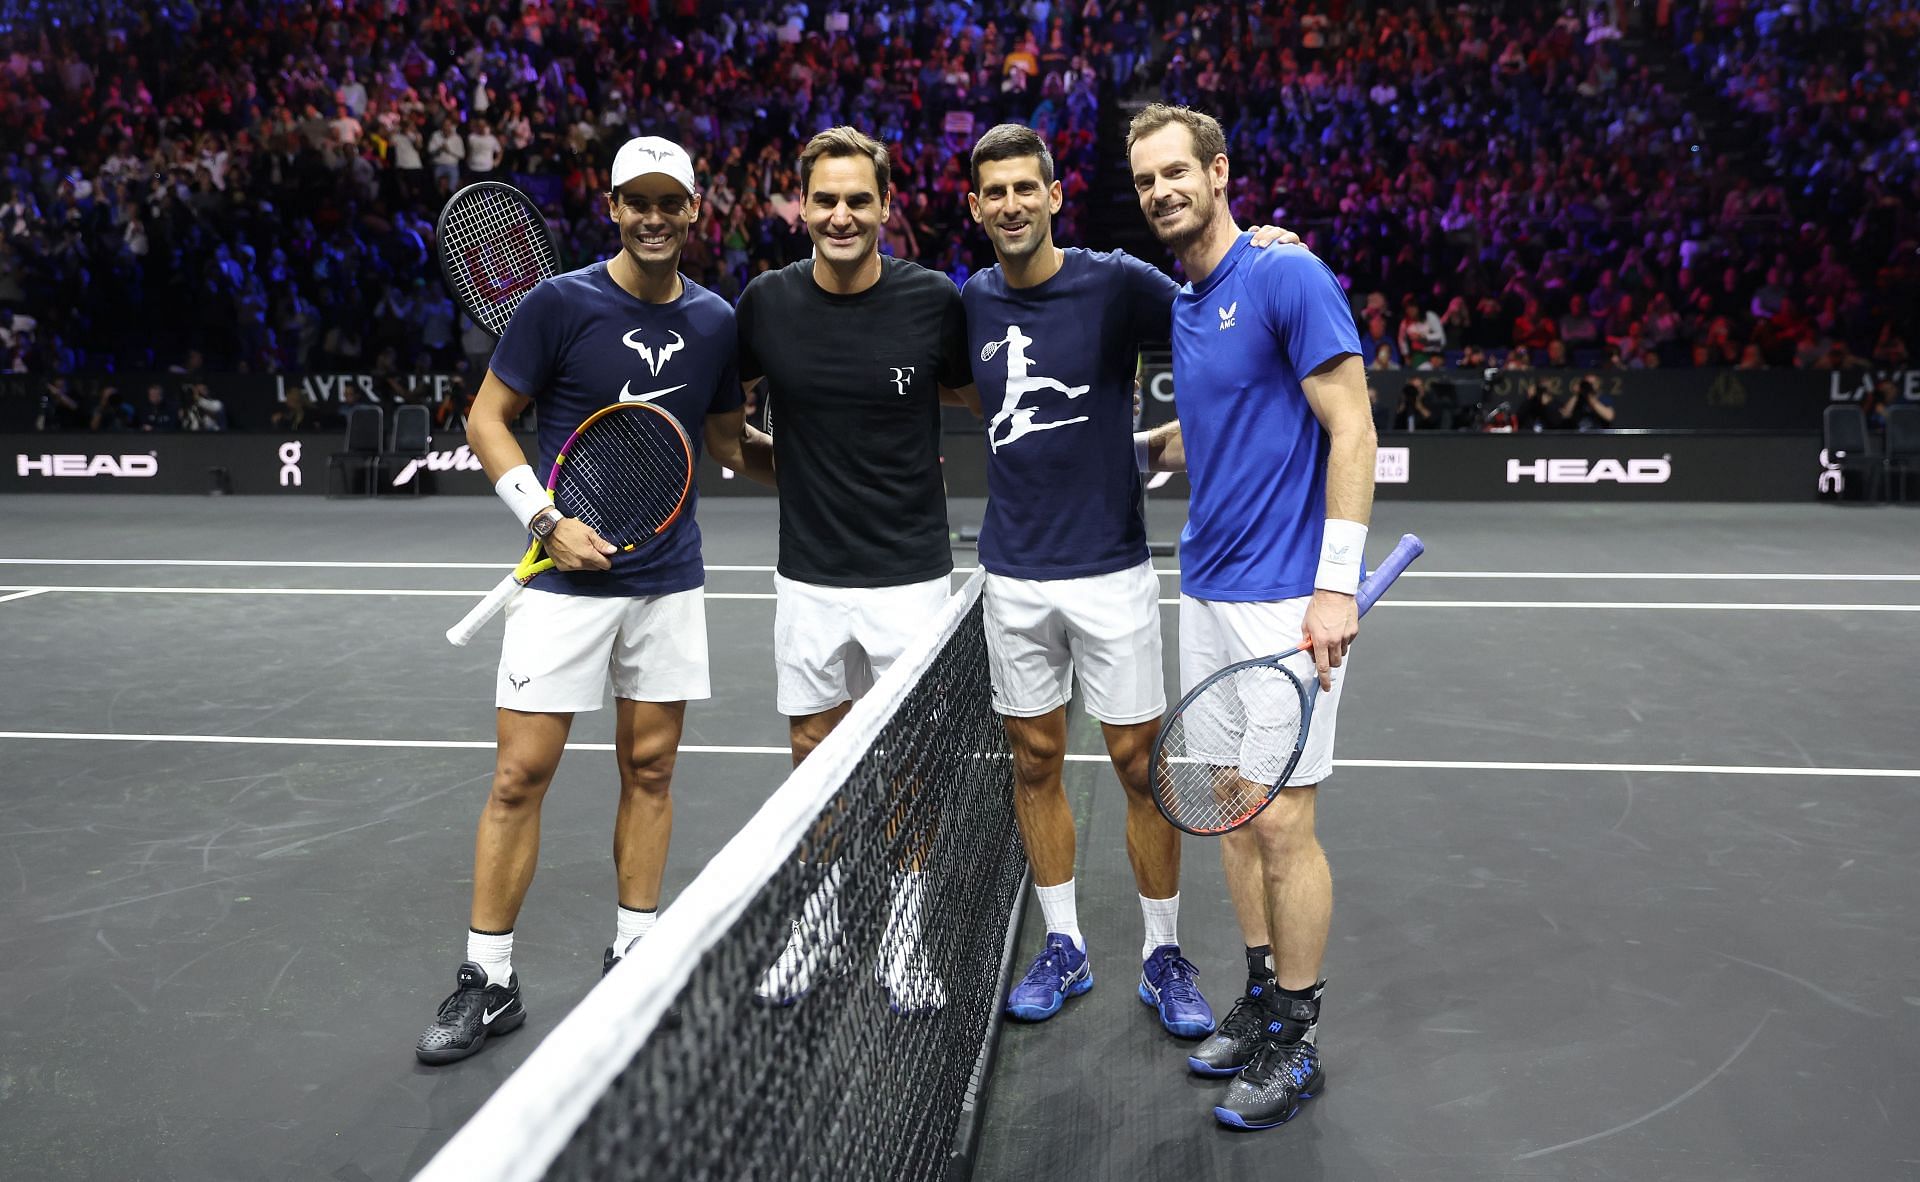 The Big Four pose ahead of the Laver Cup 2022